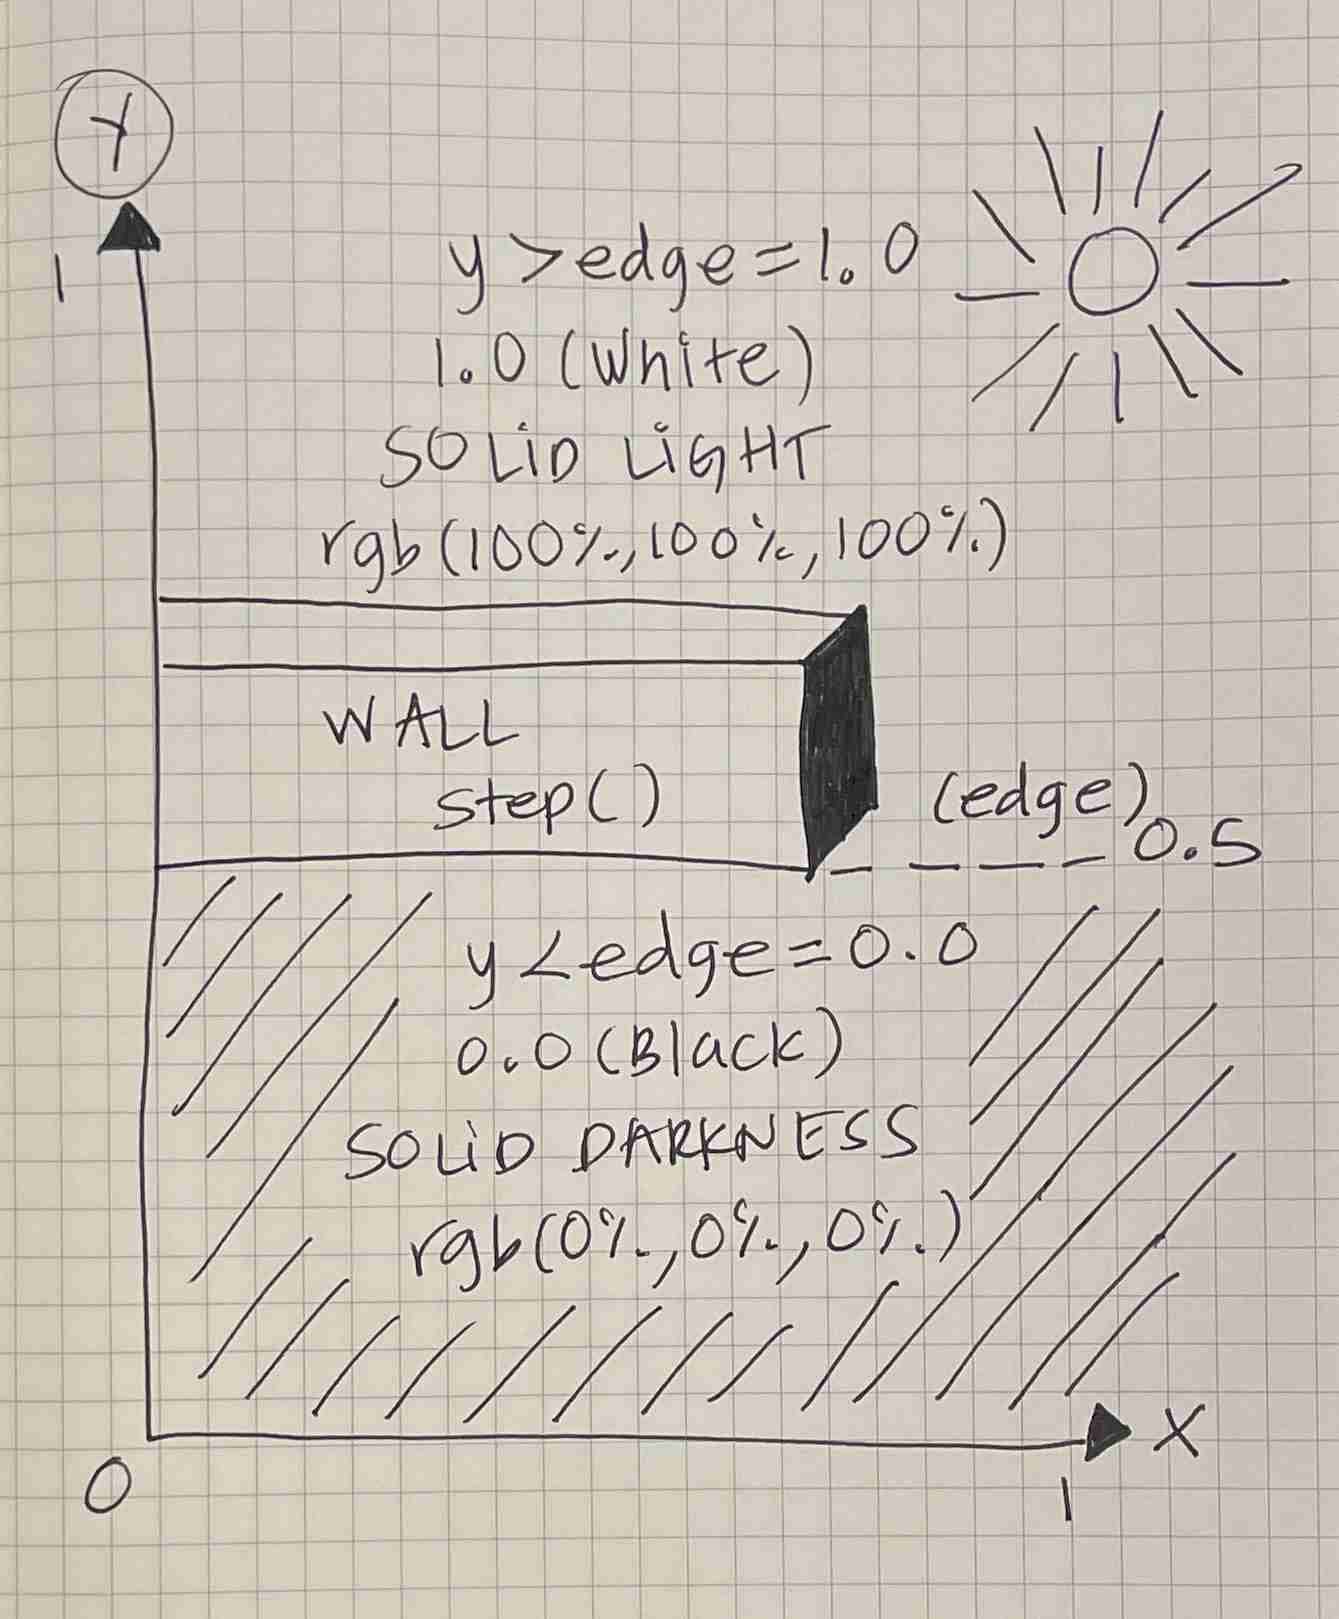 ilithya's sketch of a wall in the y coordinate